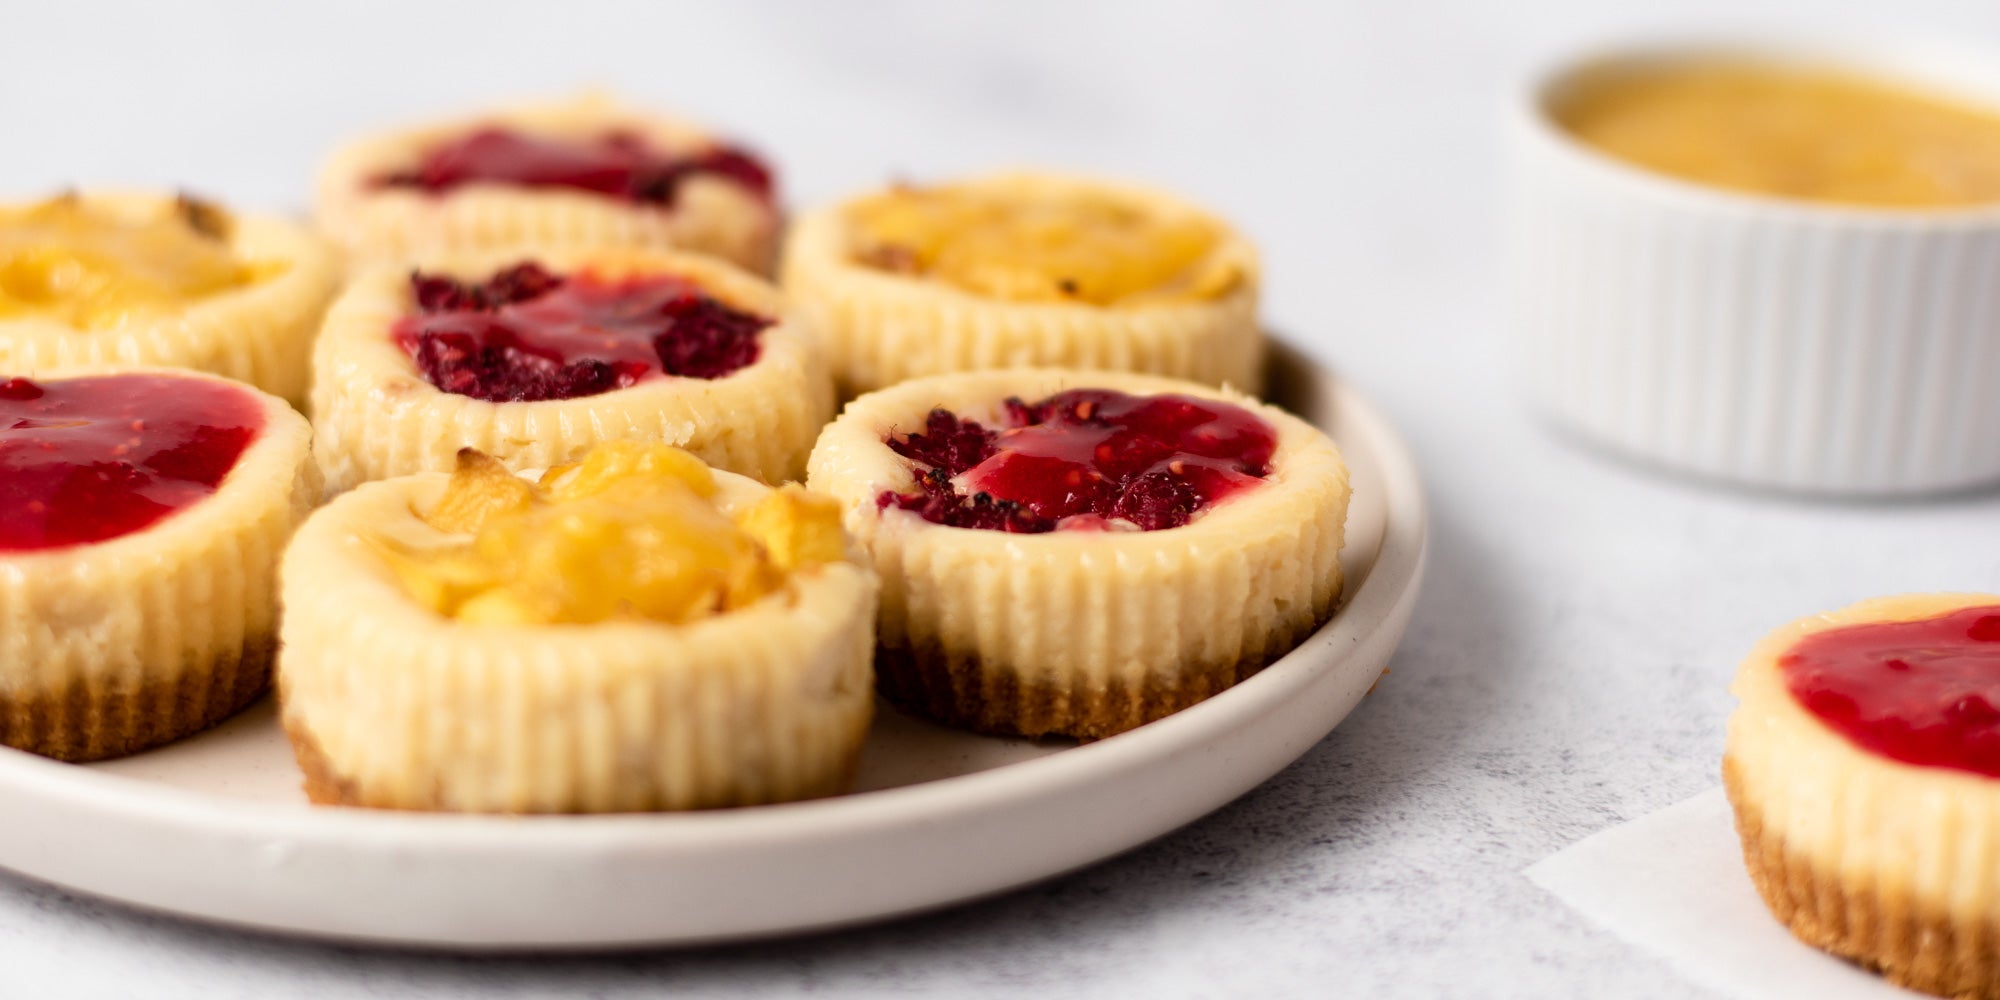 Plate of mini cheesecakes topped with fruit